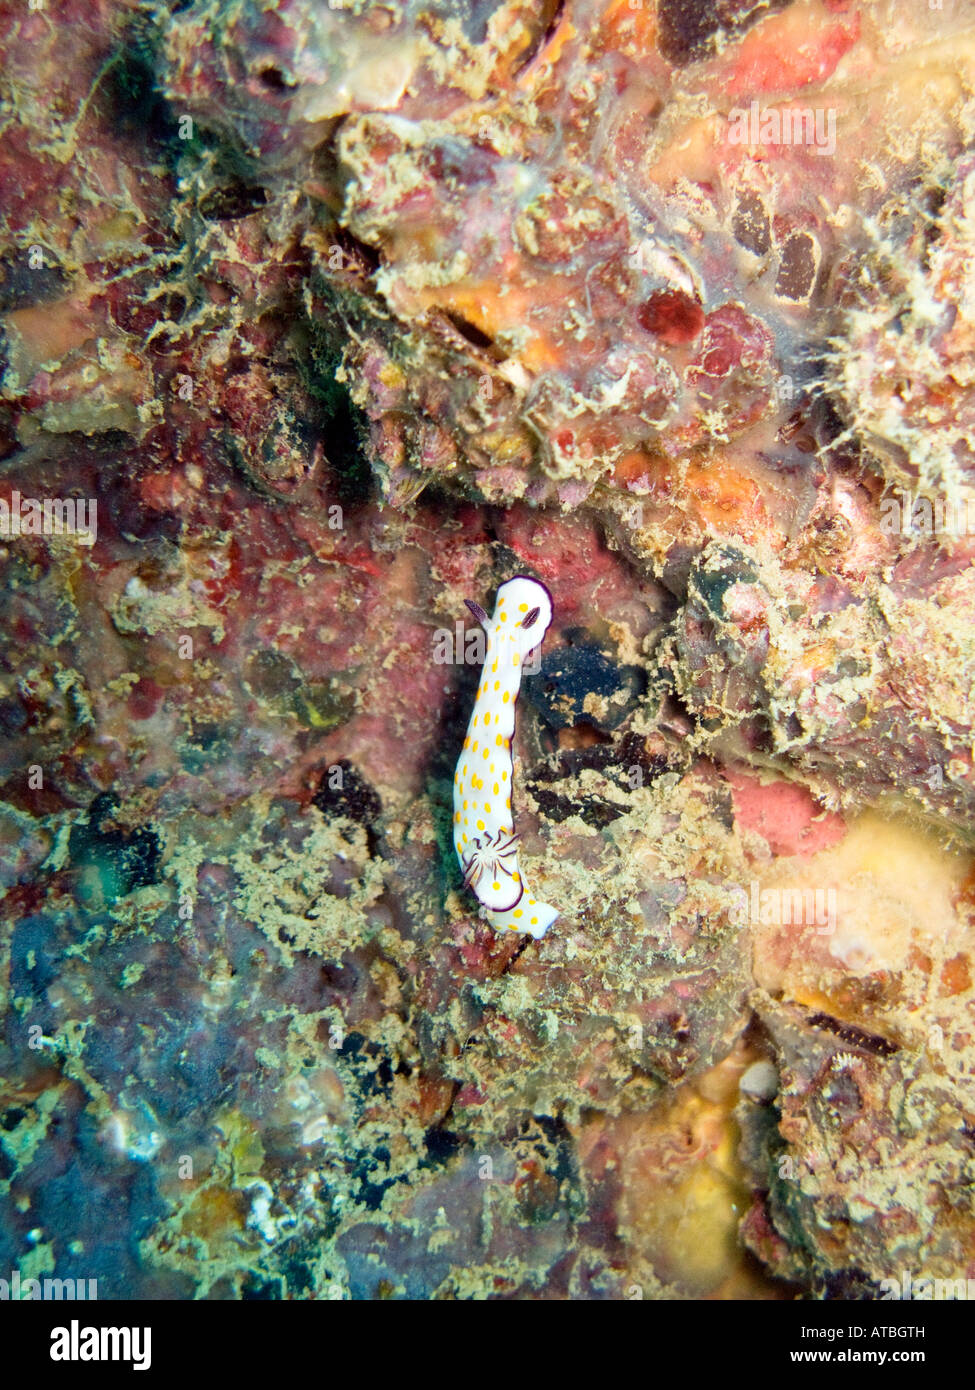 White nudibranch with orange spots and purple margin February 4 2008, Boonsung wreck, Andaman sea, Thailand Stock Photo